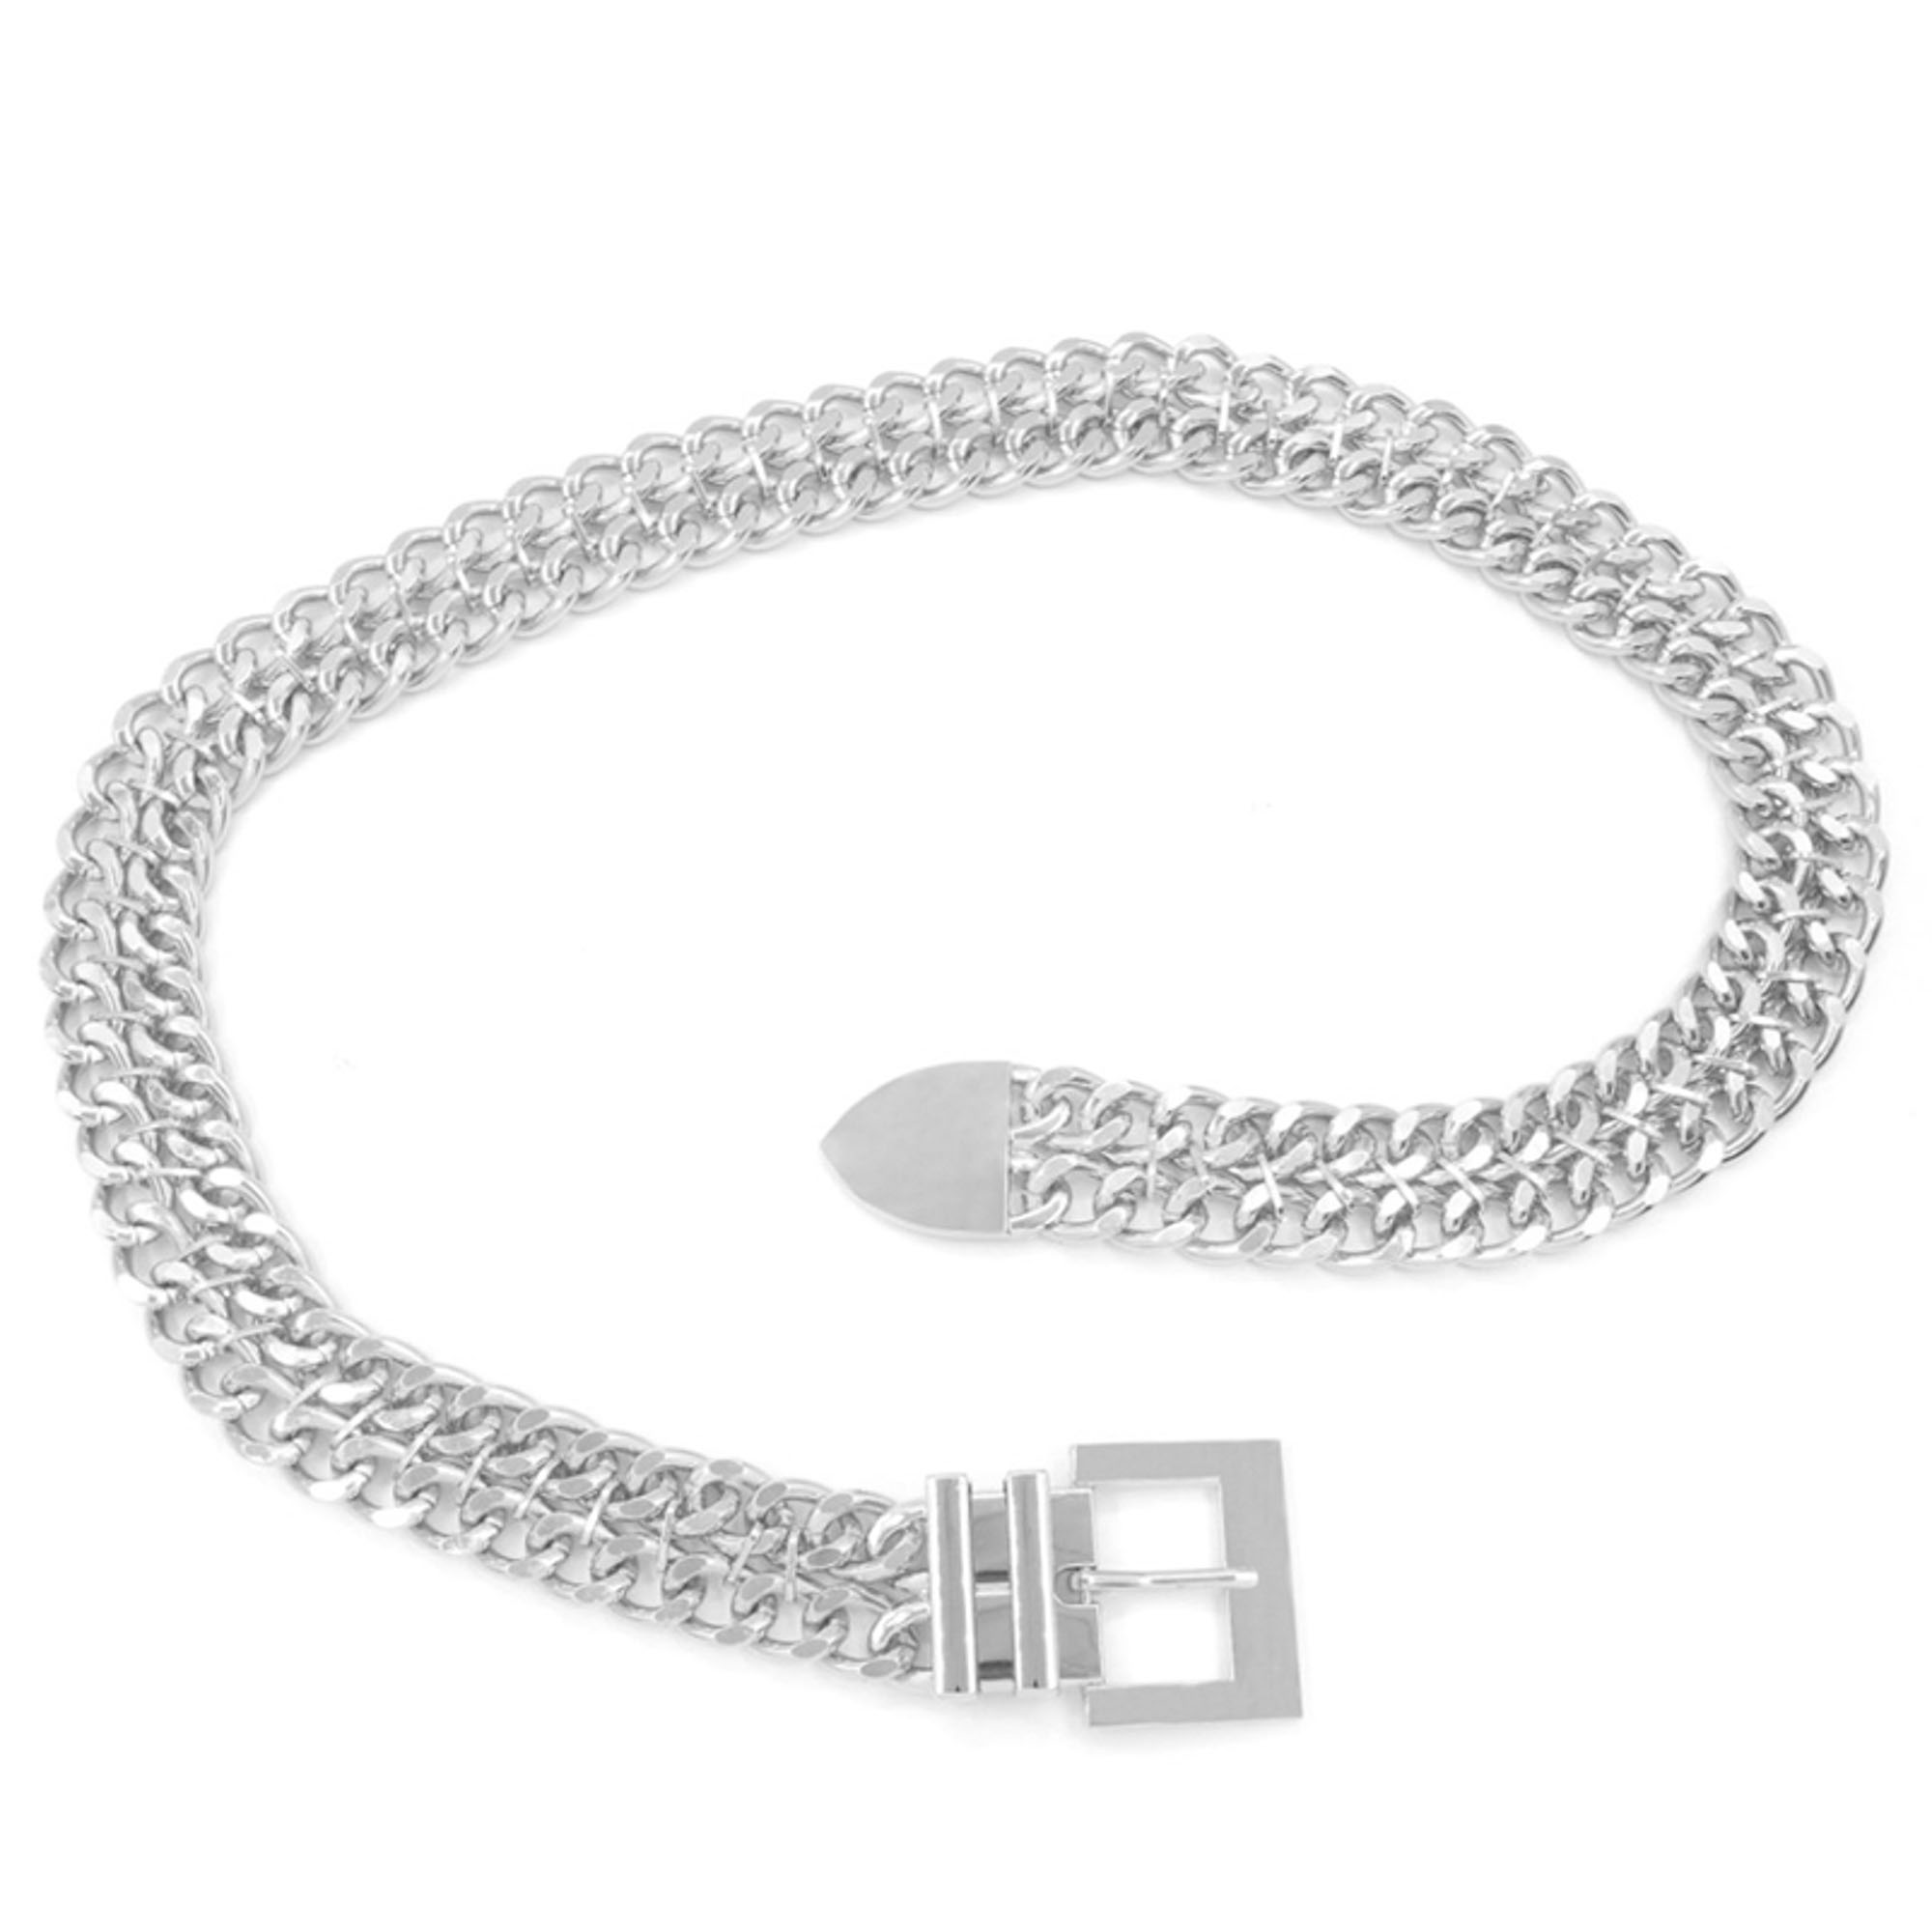 CHAIN LINKED RECTANGLE BUCKLE BELT